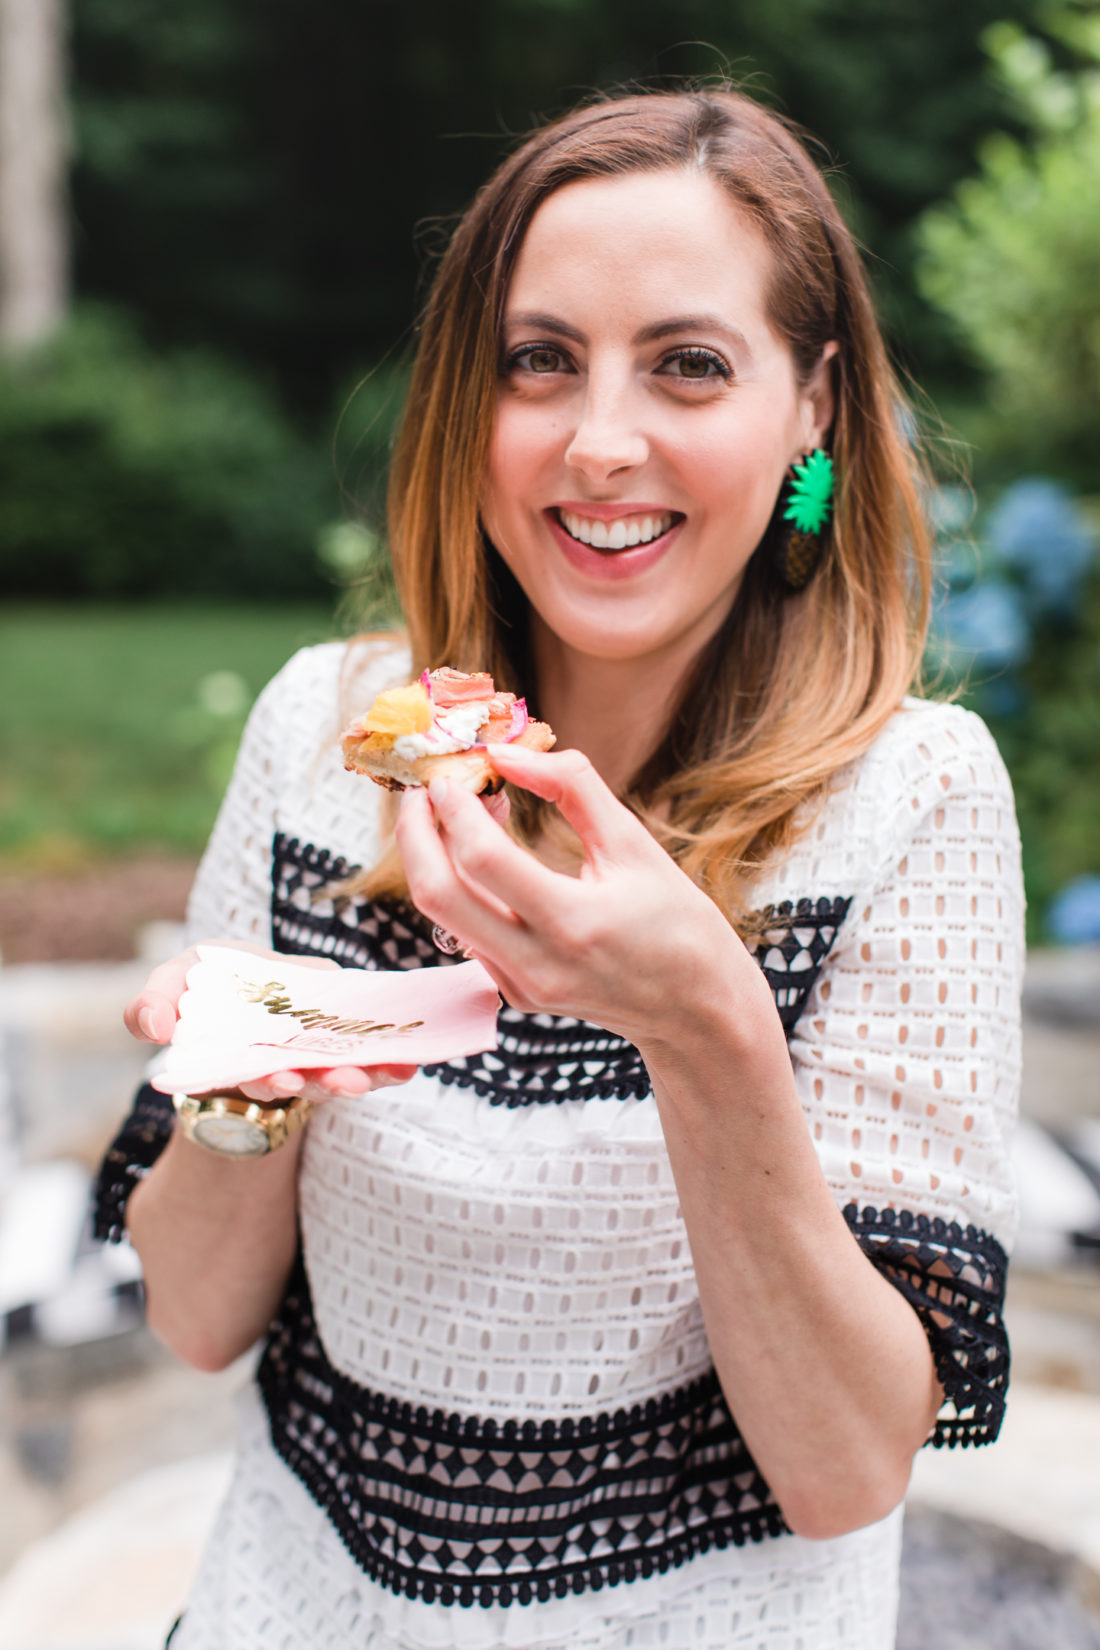 Eva Amurri Martino serves frozen Pineapple daquiris and a grilled hawaiian pizza at a Pineapple-themed happy hour at her Connecticut home